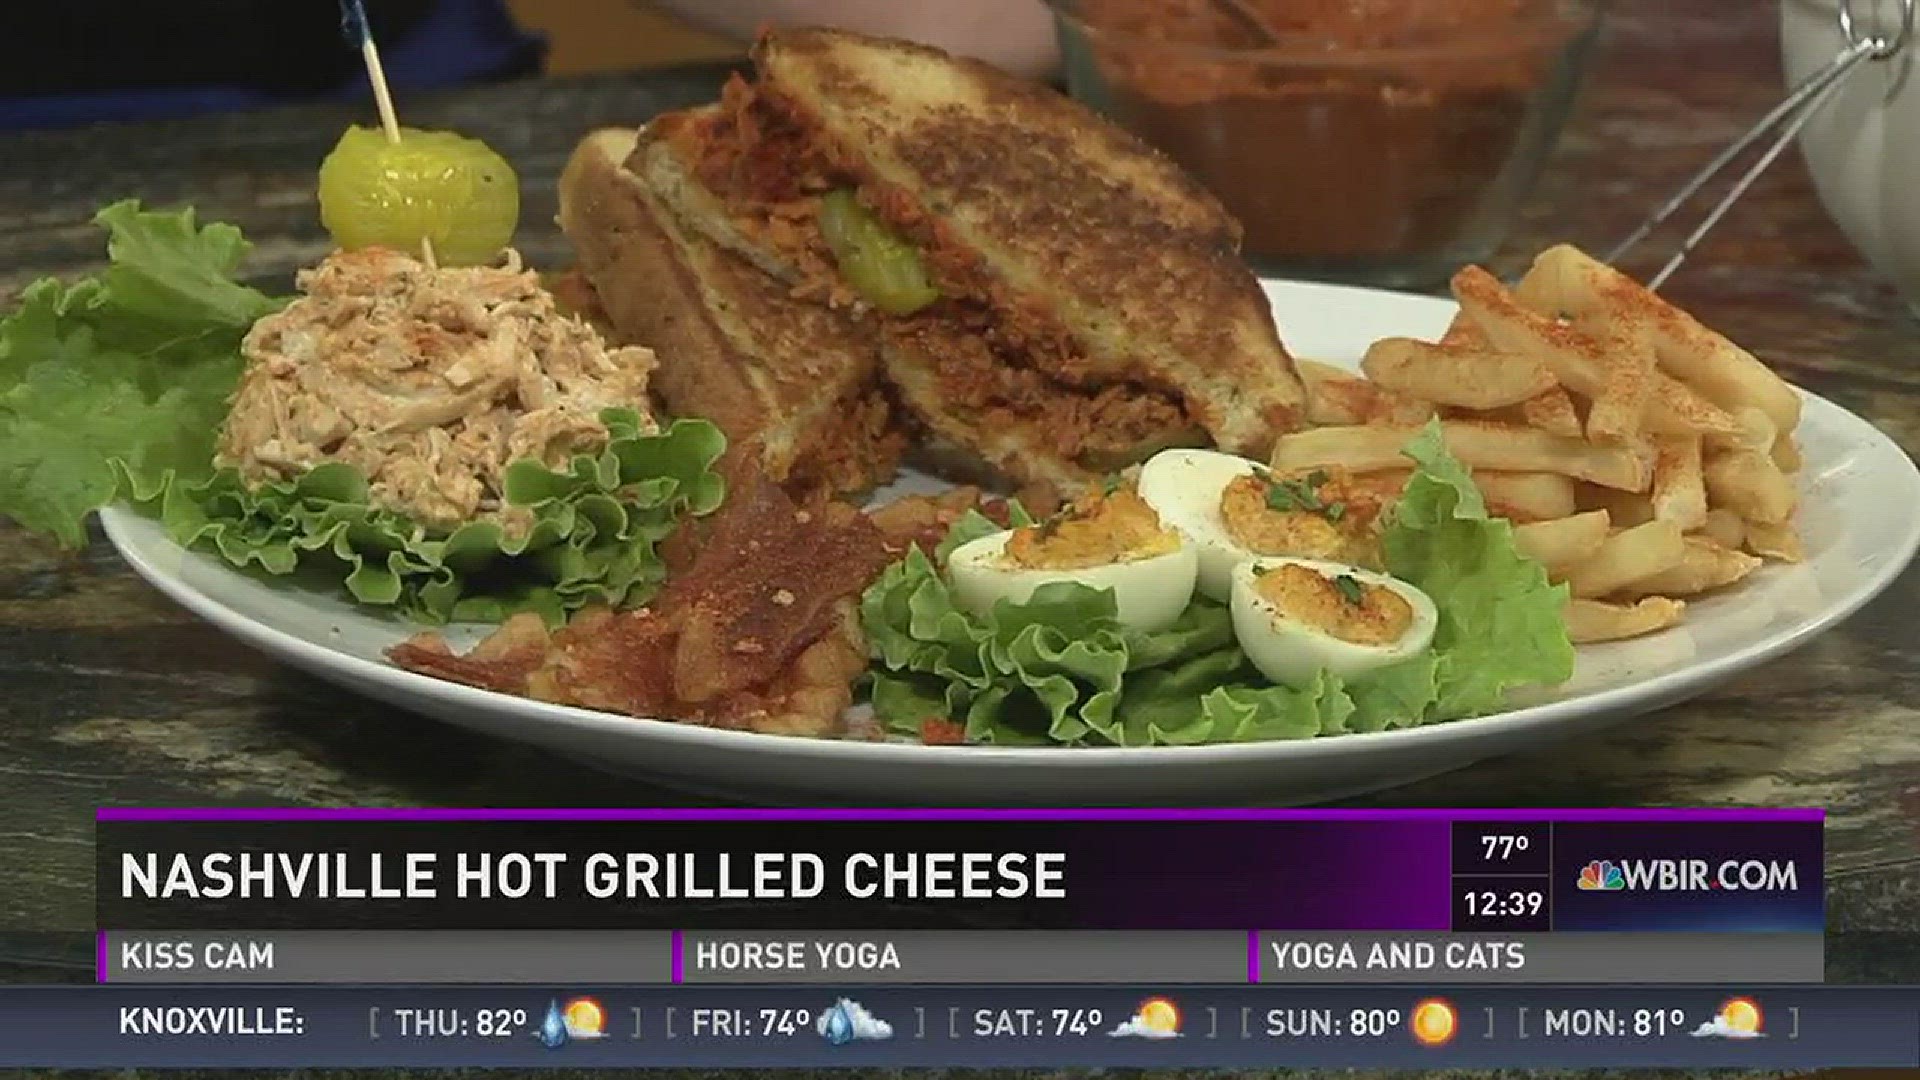 Kim Wilcox from It's All So Yummy Cafe shows how to make a Nashville hot grilled cheese.